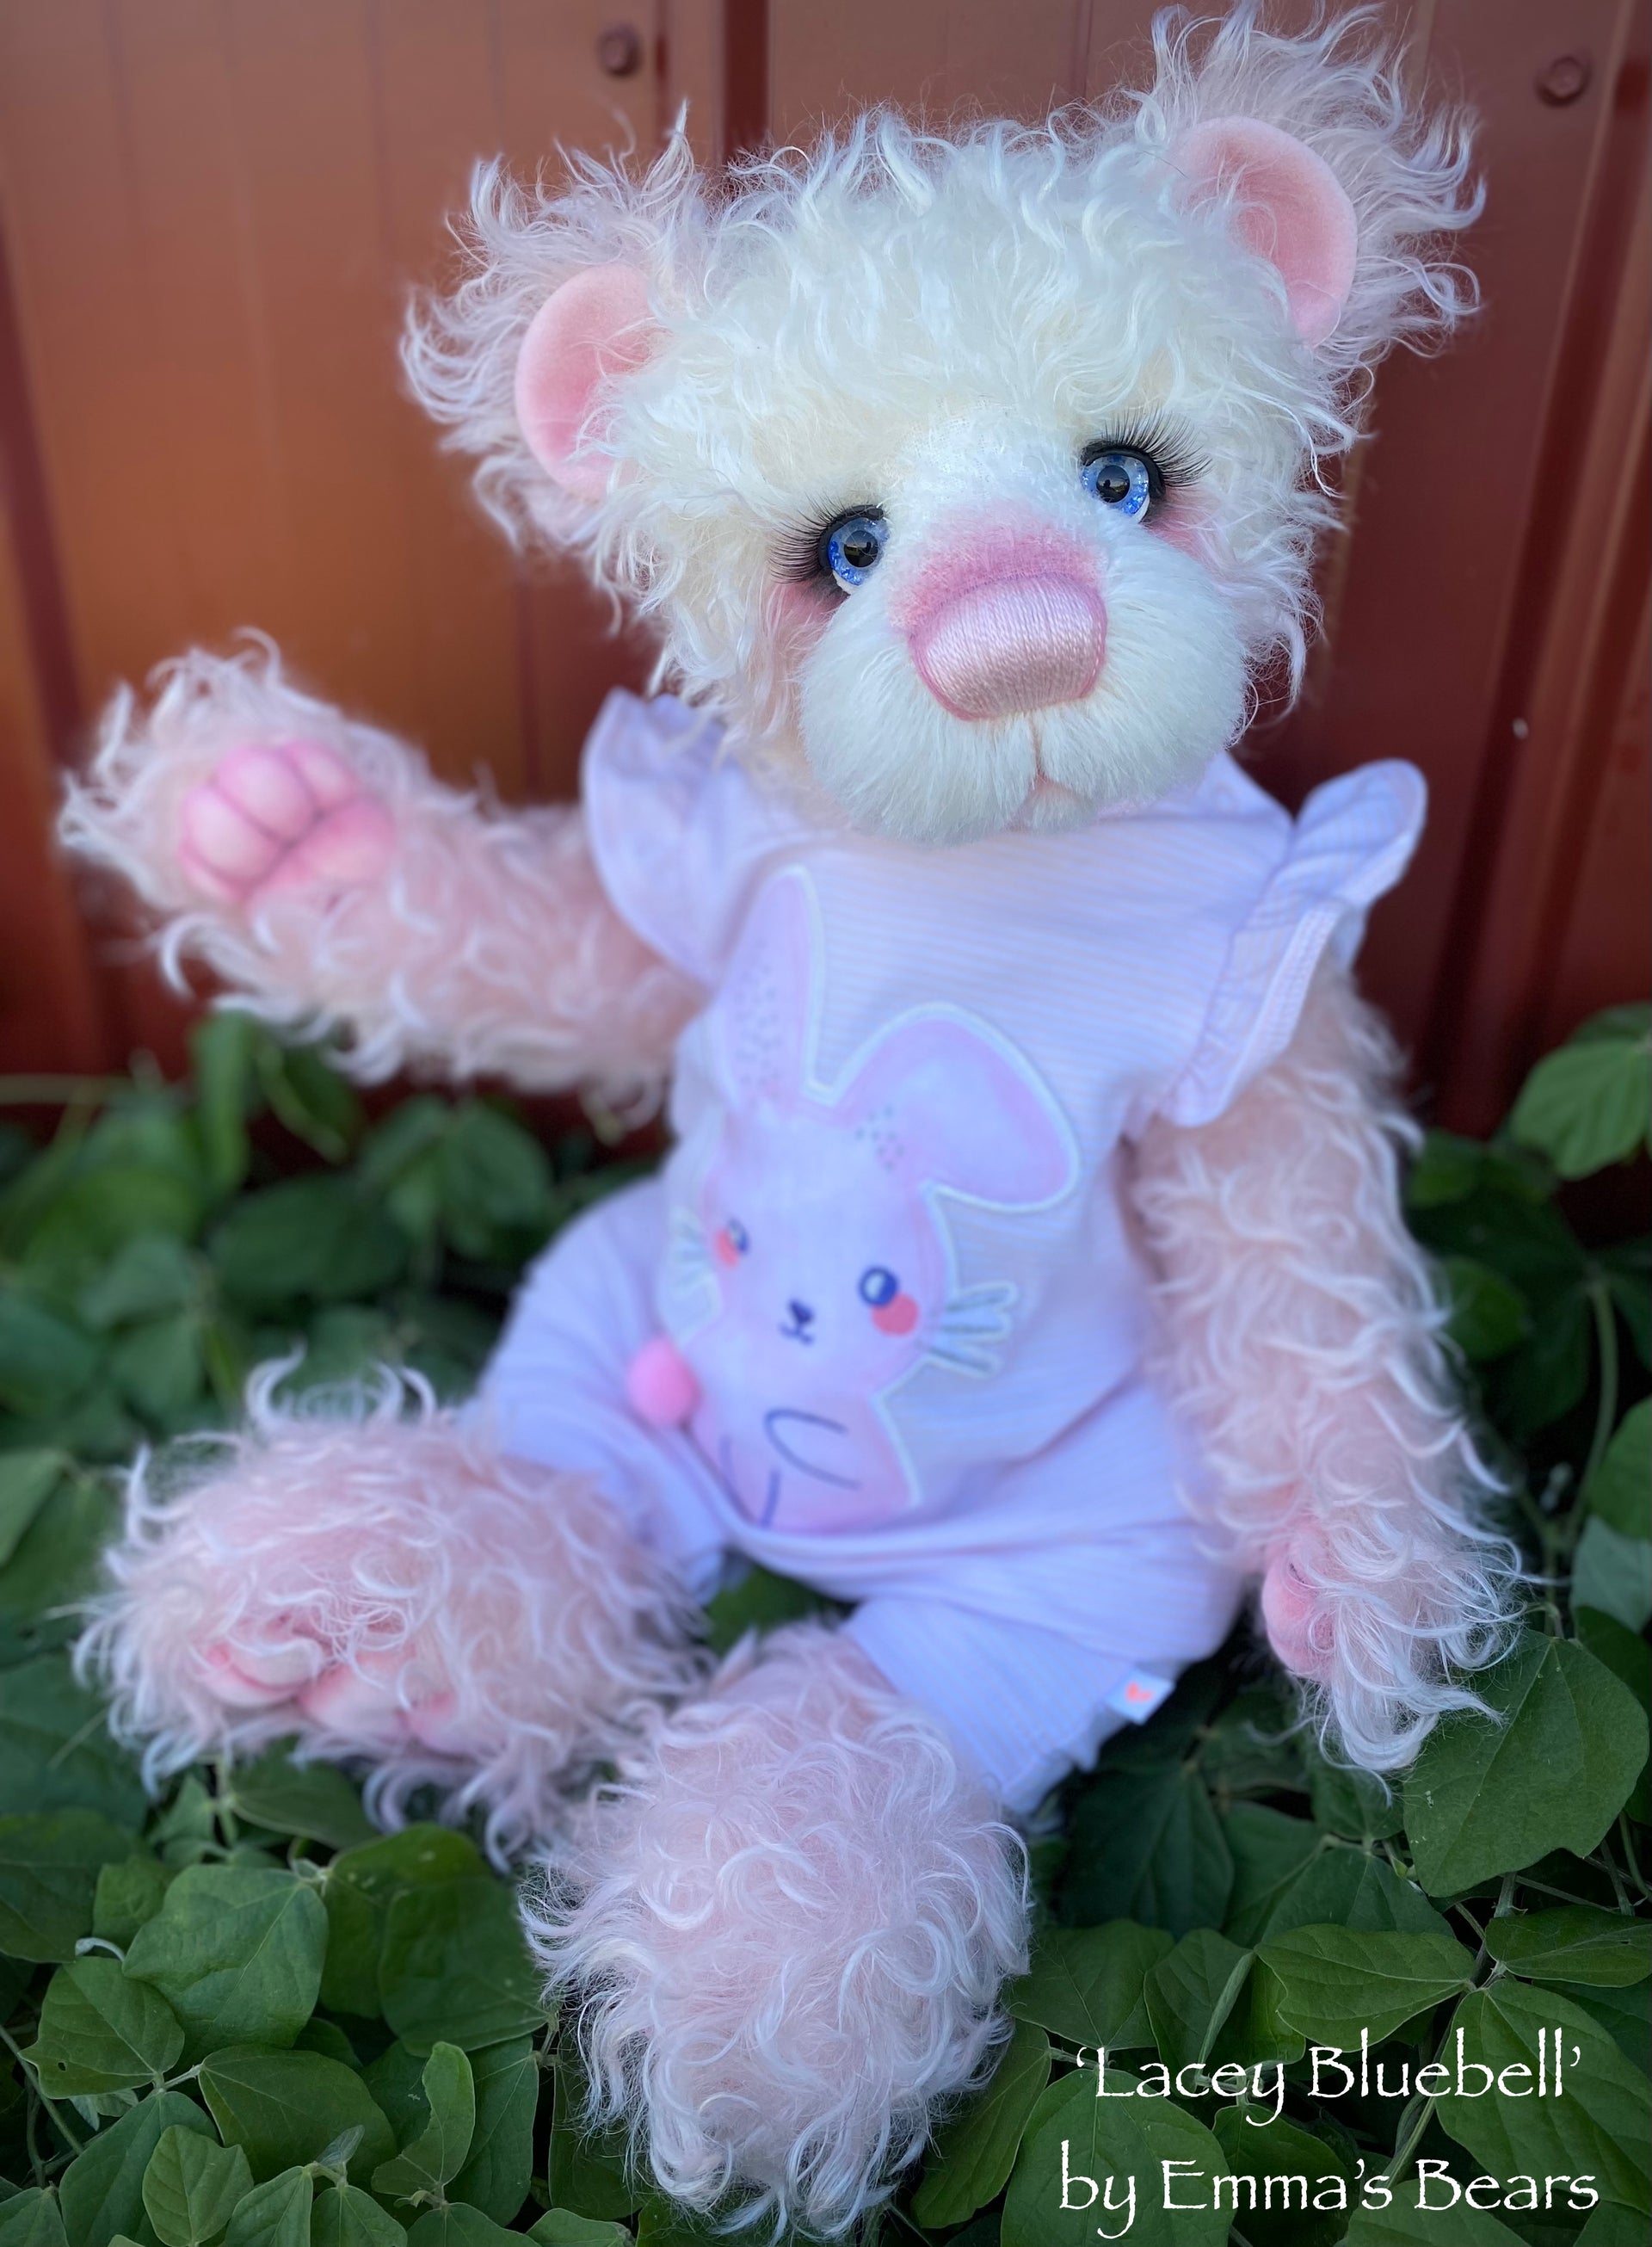 Lacey Bluebell - 17" Hand-Dyed Mohair Artist Baby Bear by Emma's Bears - OOAK